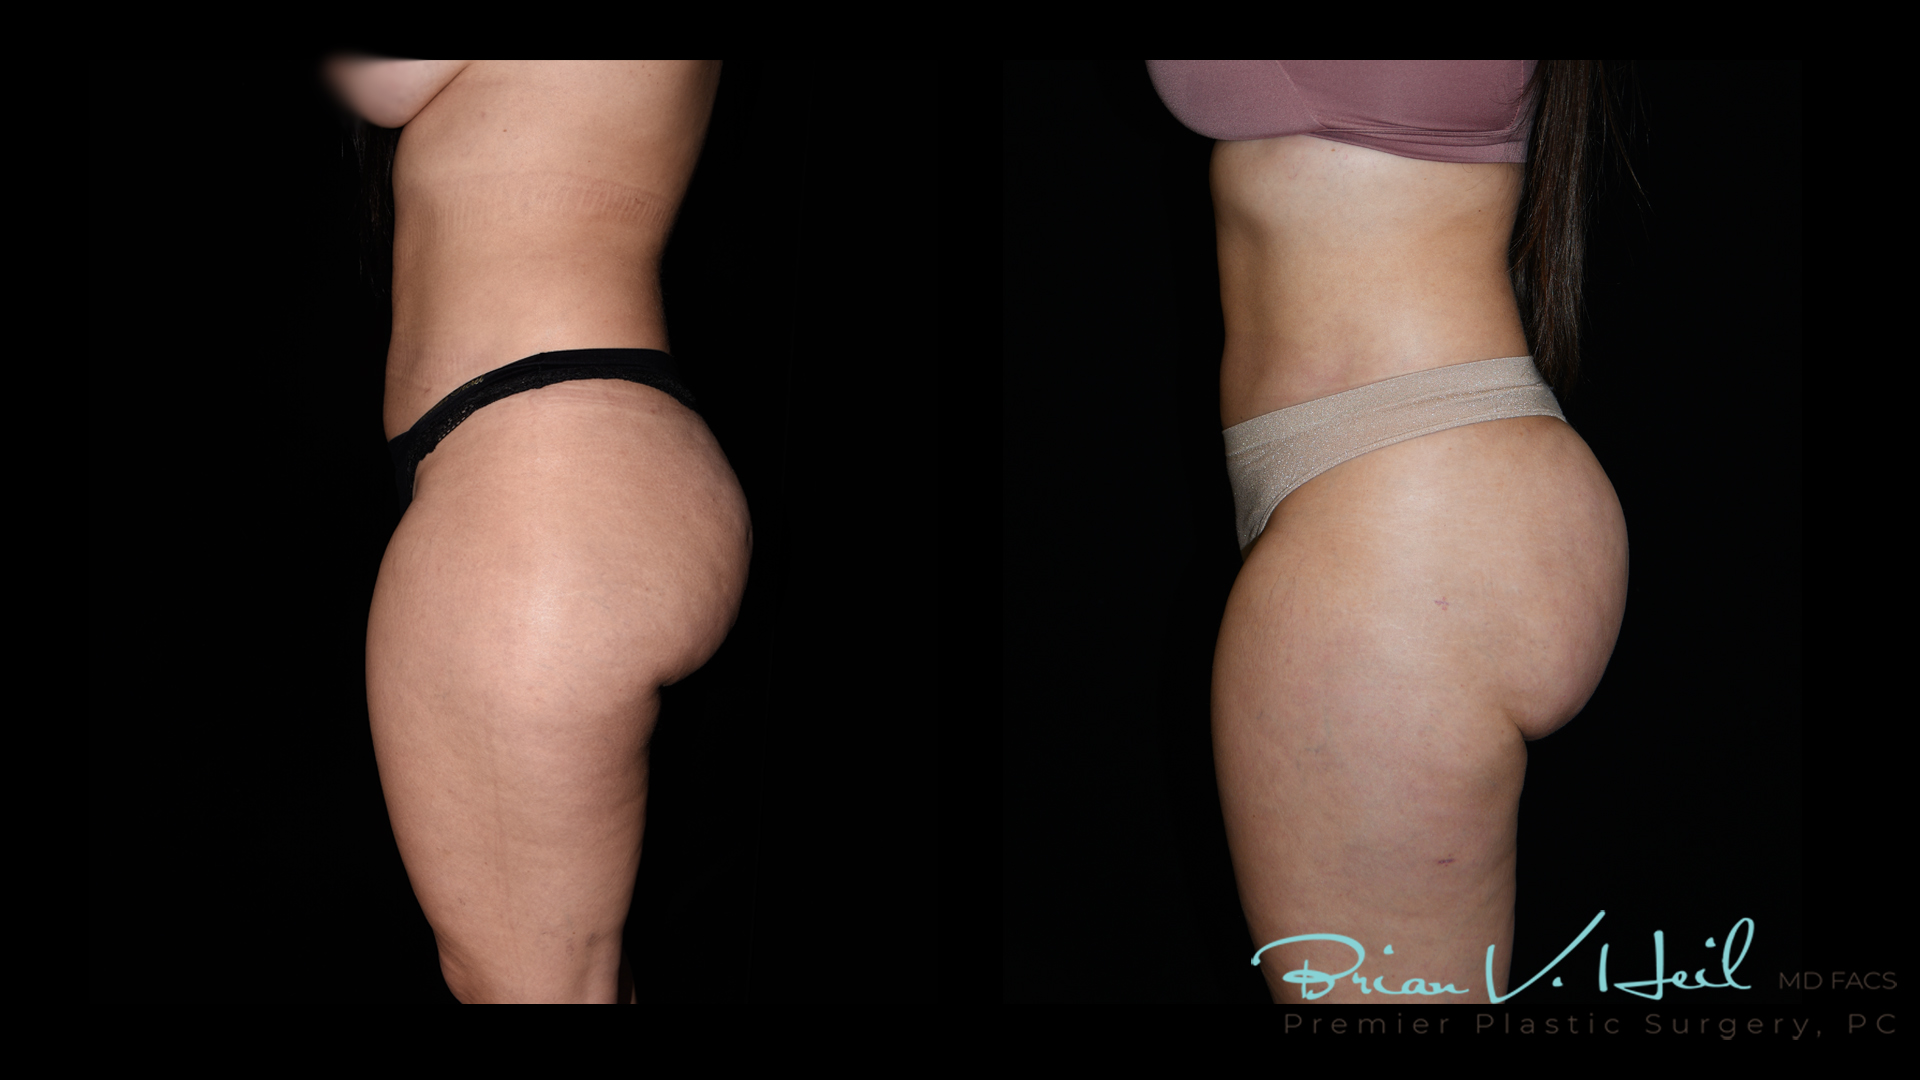 Brazilian Butt Lift Before and After | Premier Plastic Surgery